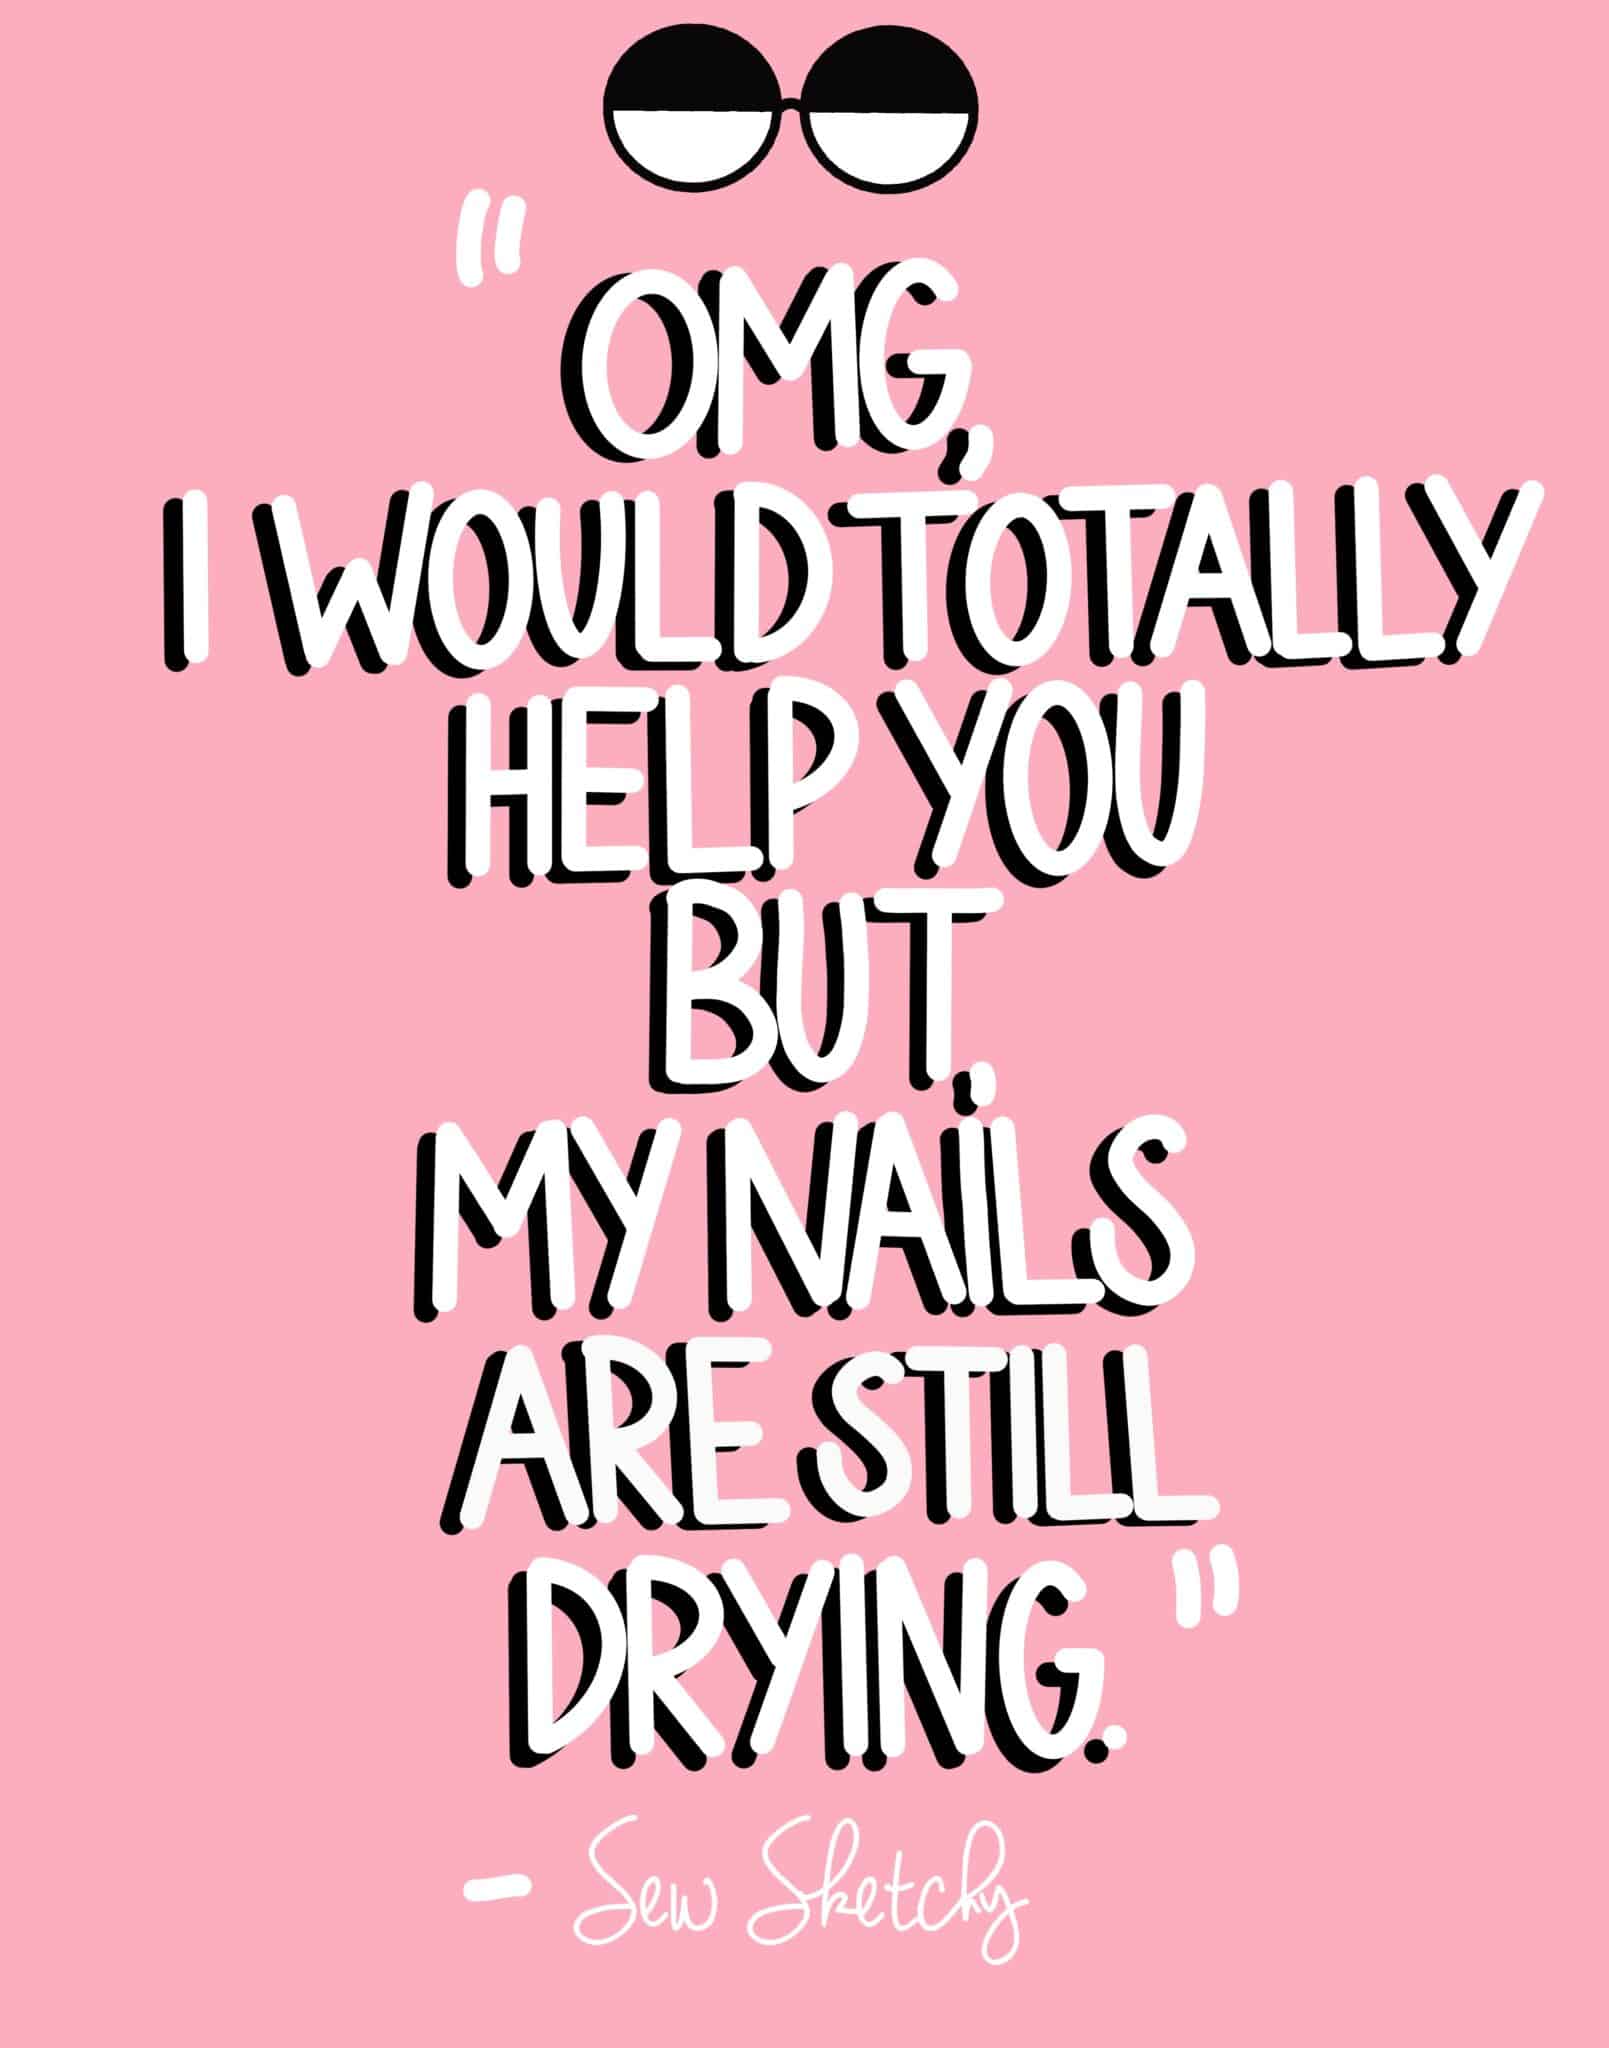 OMG, I WOULD TOTALLY HELP YOU BUT, MY NAILS ARE STILL DRYING.